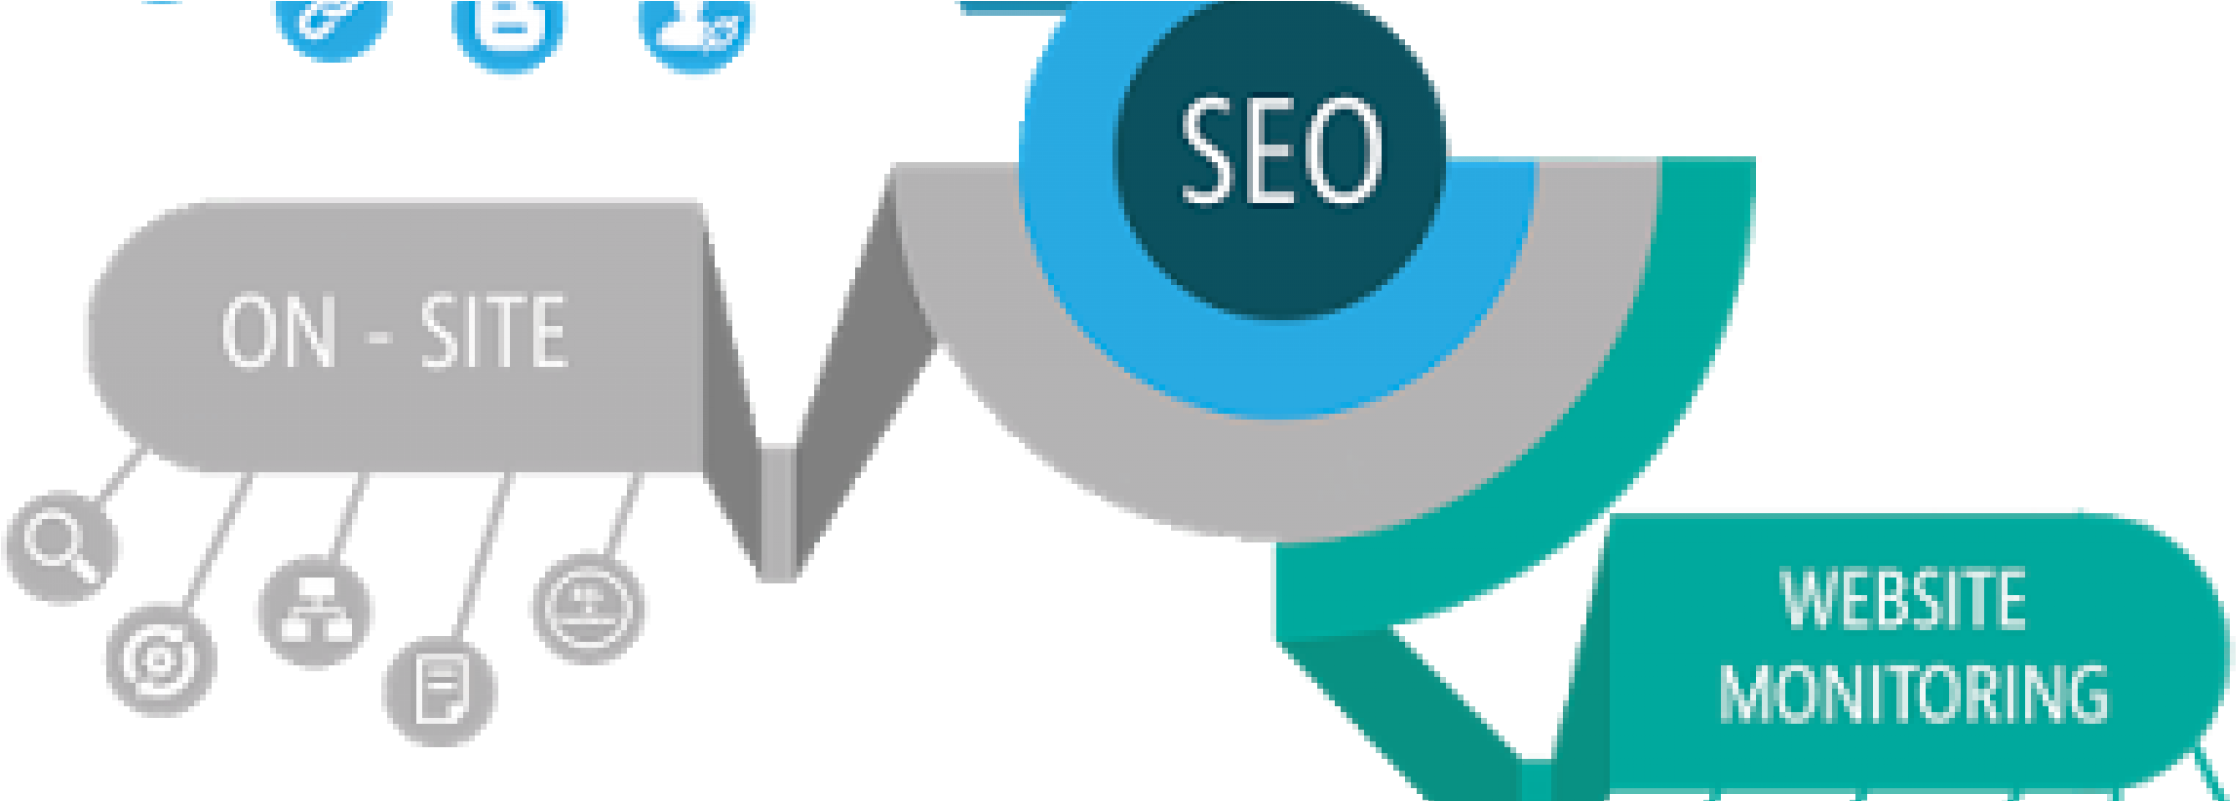 Why You Need To Hire Seo Company - Search Engine Optimization Services (2340x800)